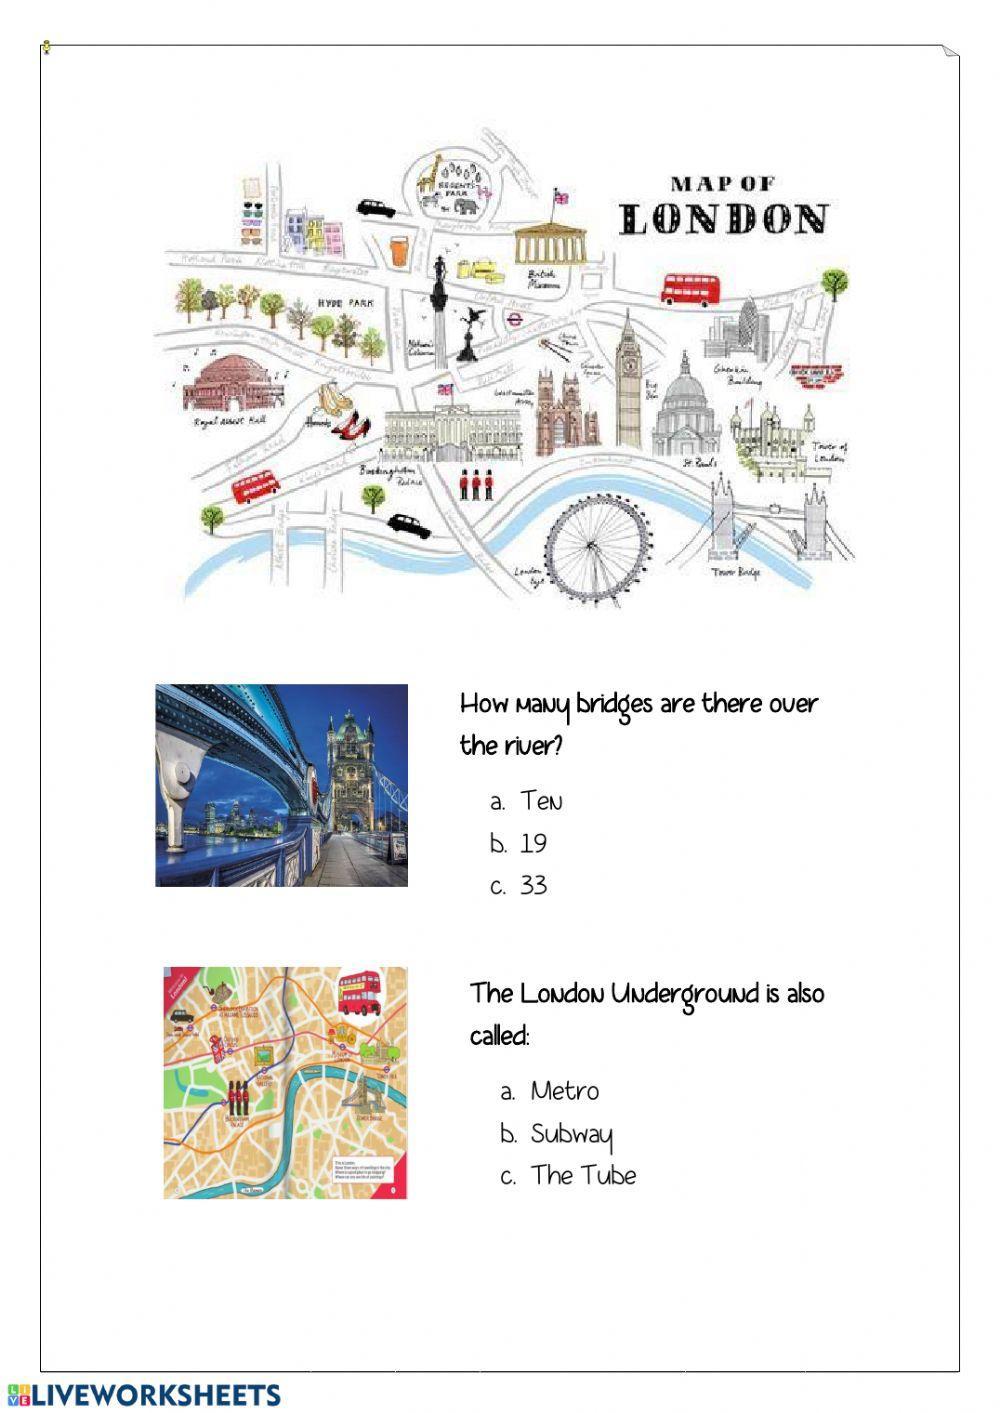 How much you know about London?